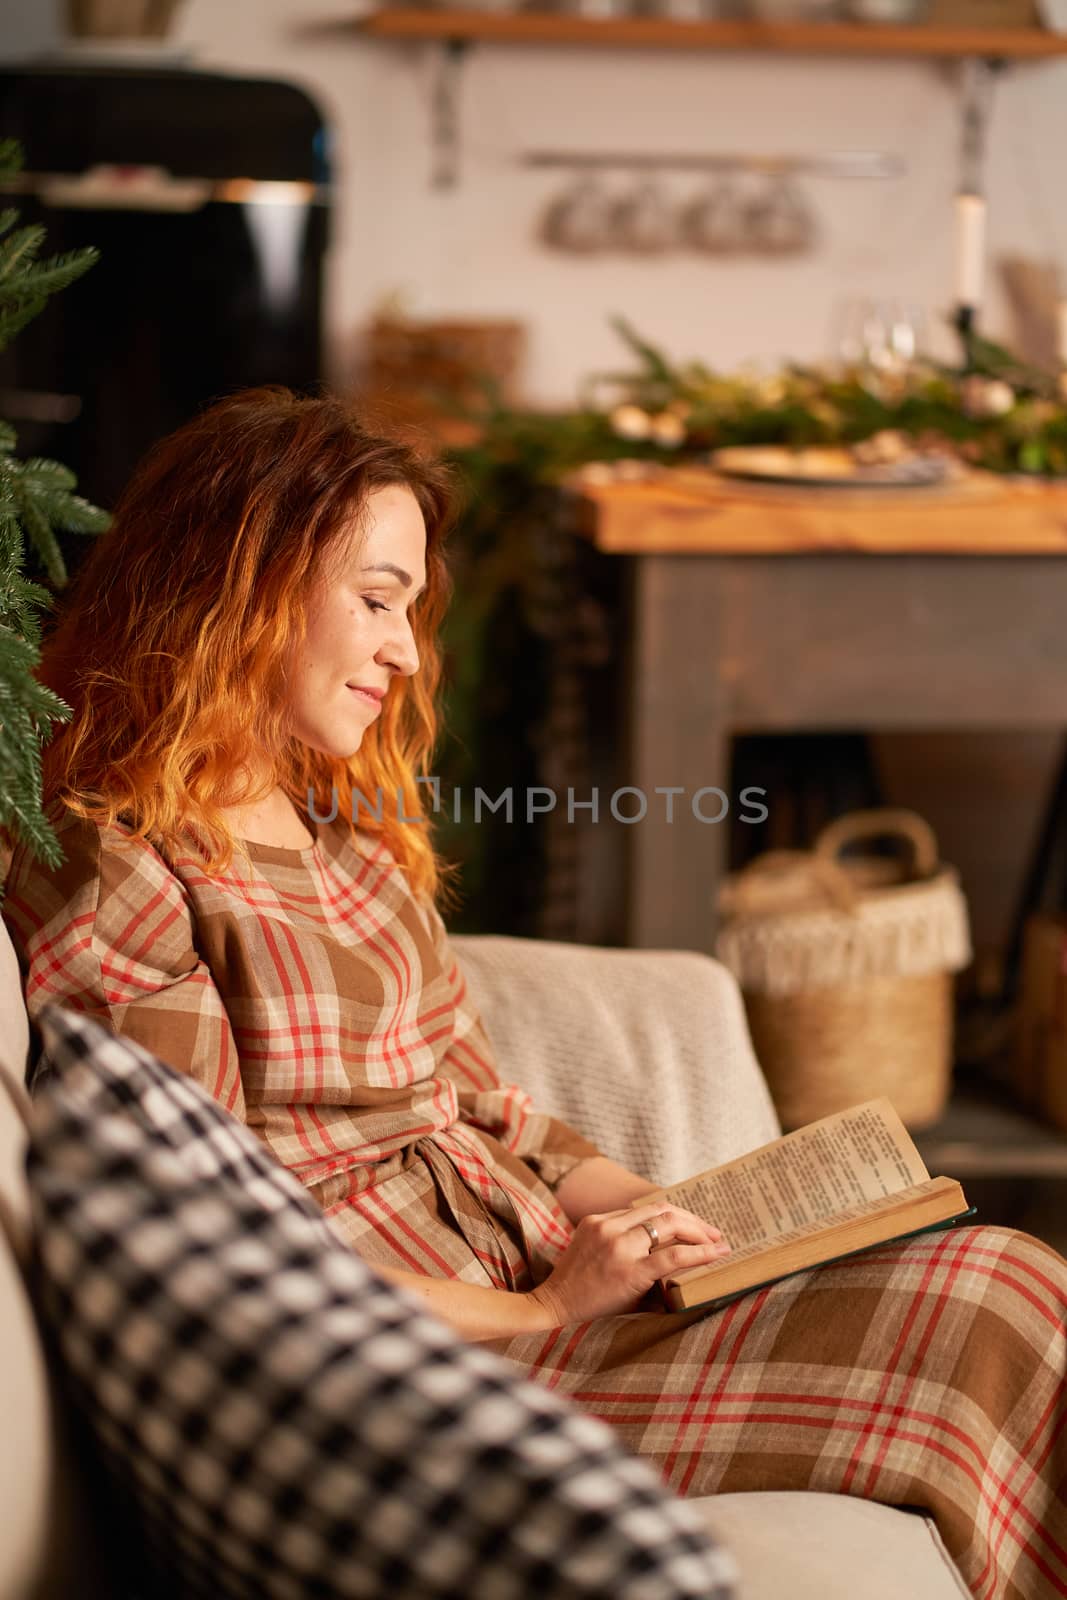 A cute girl is reading a book in a warm and cozy atmosphere. Relaxation and privacy concept.